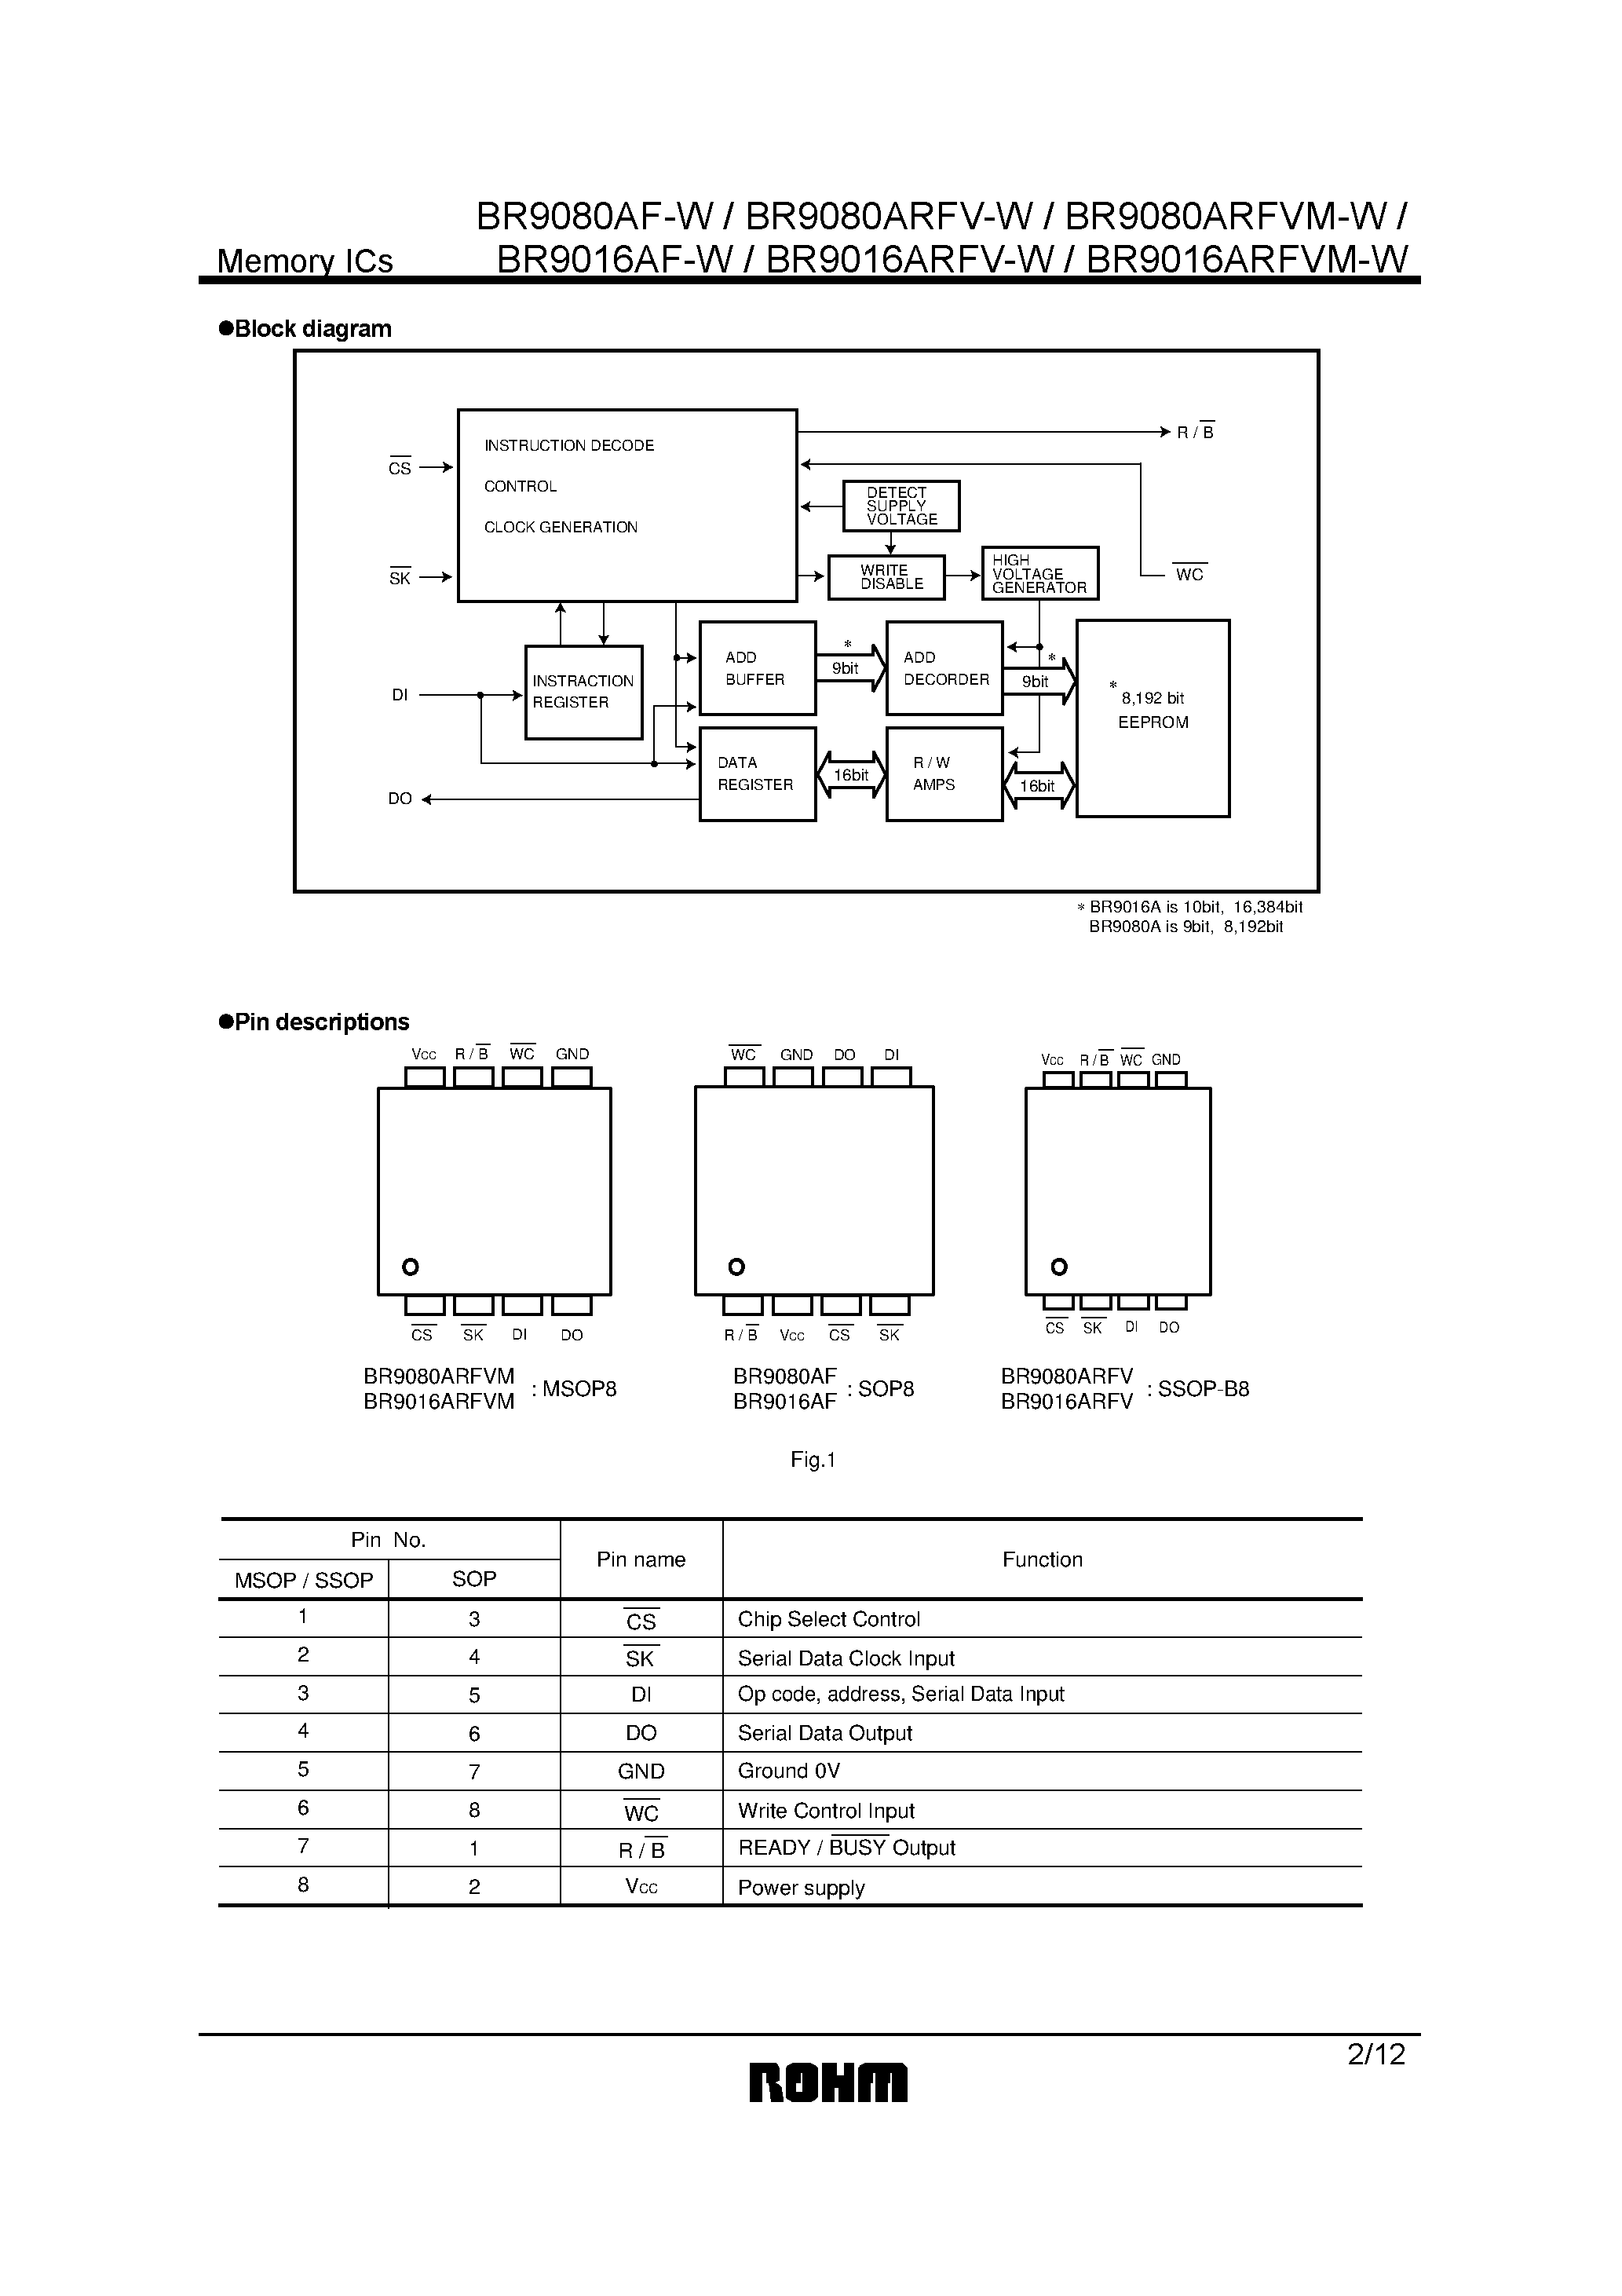 Datasheet BR9016ARFV-W - 8k/ 16k bit EEPROMs for direct connection to serial ports page 2